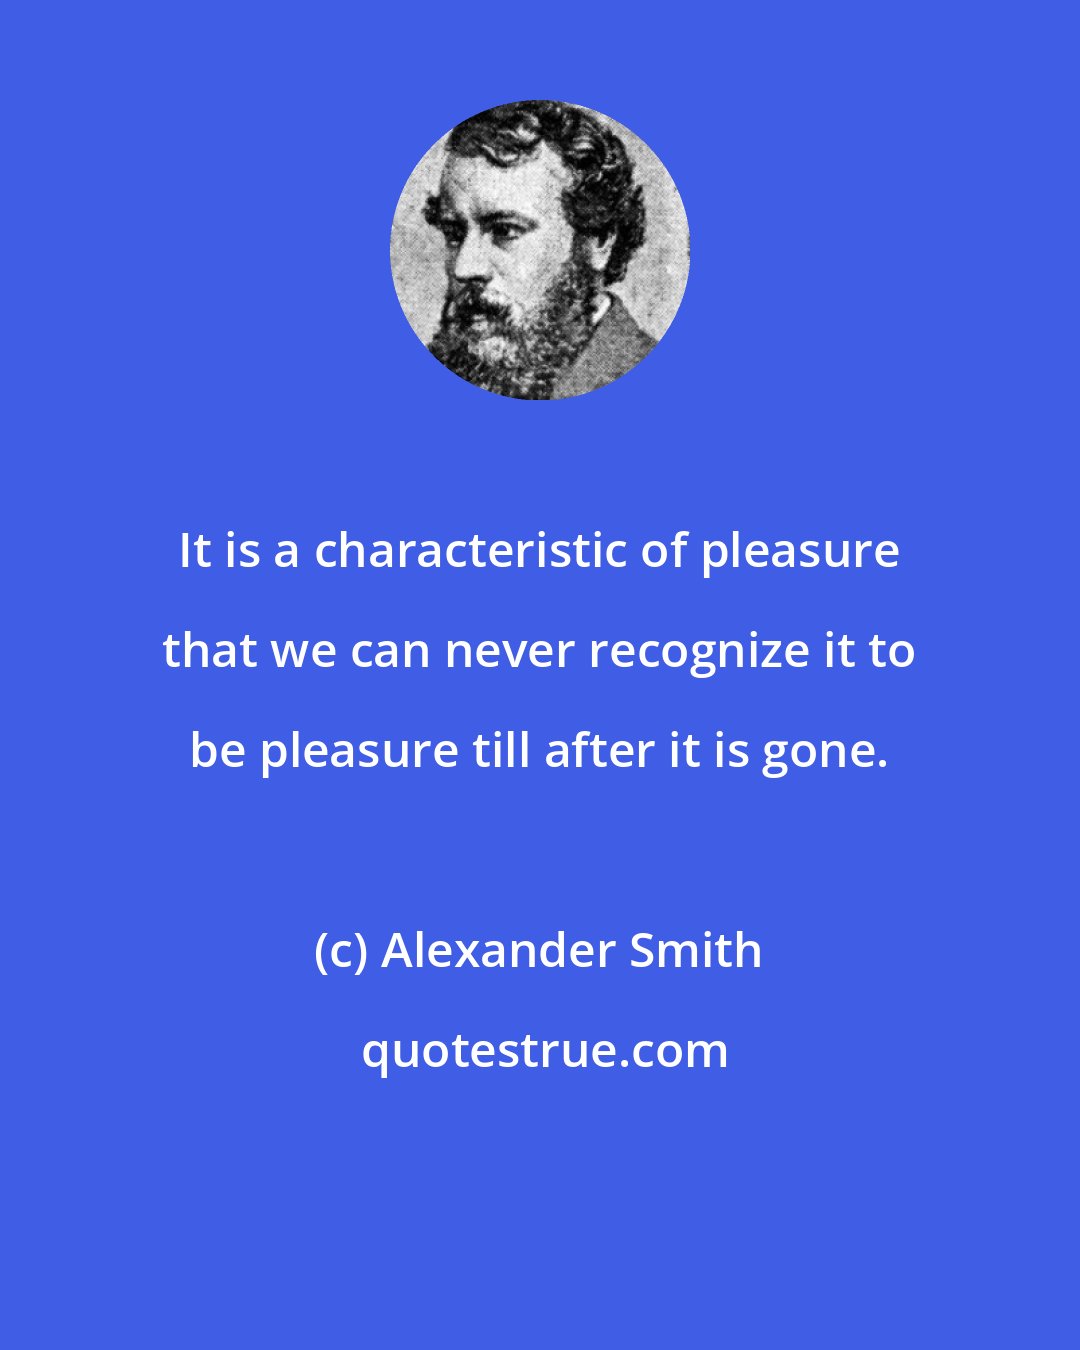 Alexander Smith: It is a characteristic of pleasure that we can never recognize it to be pleasure till after it is gone.